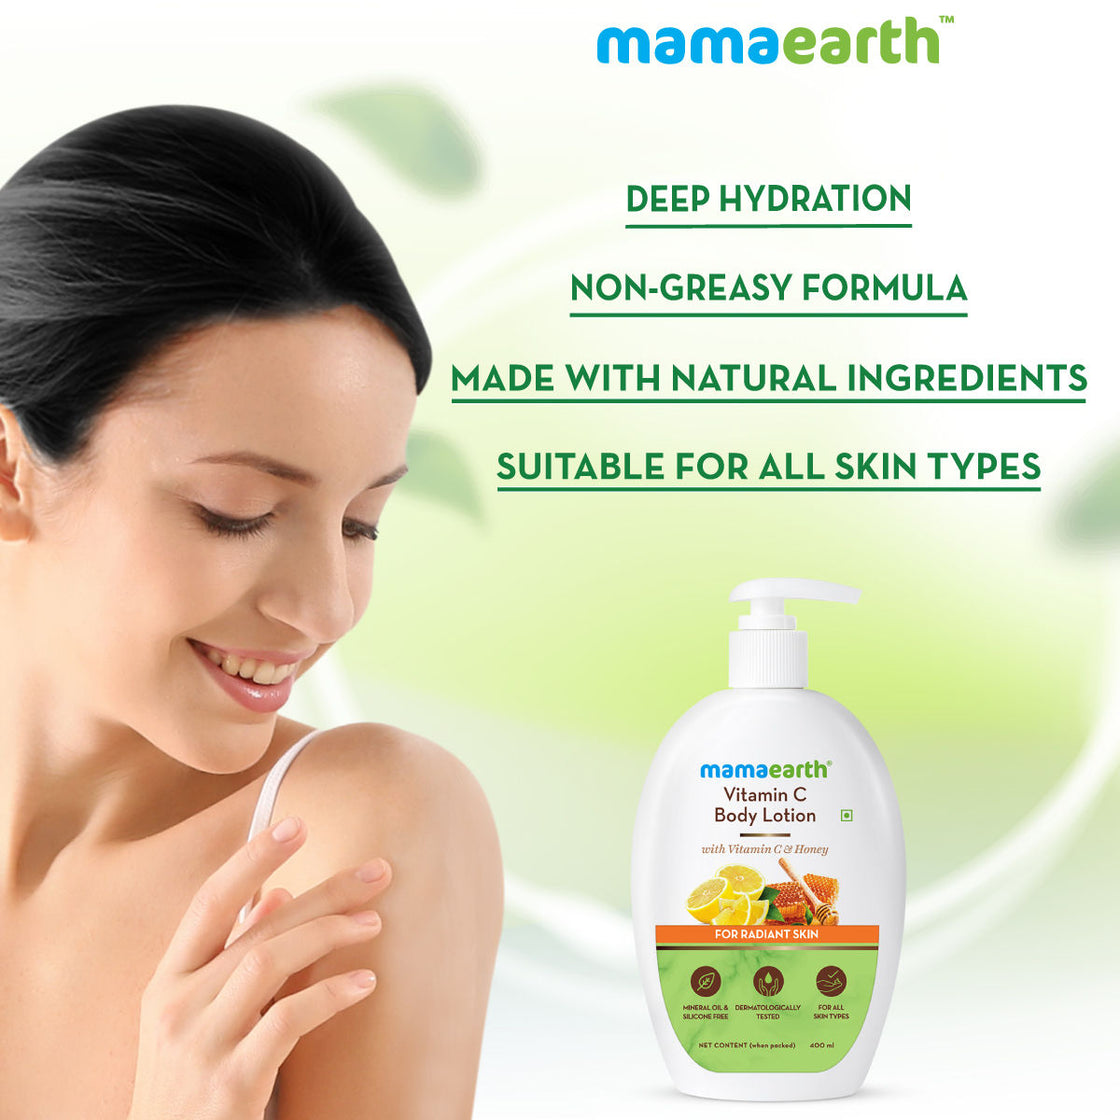 Mamaearth Vitamin C Body Lotion With Vitamin C & Honey For Radiant Skin-4